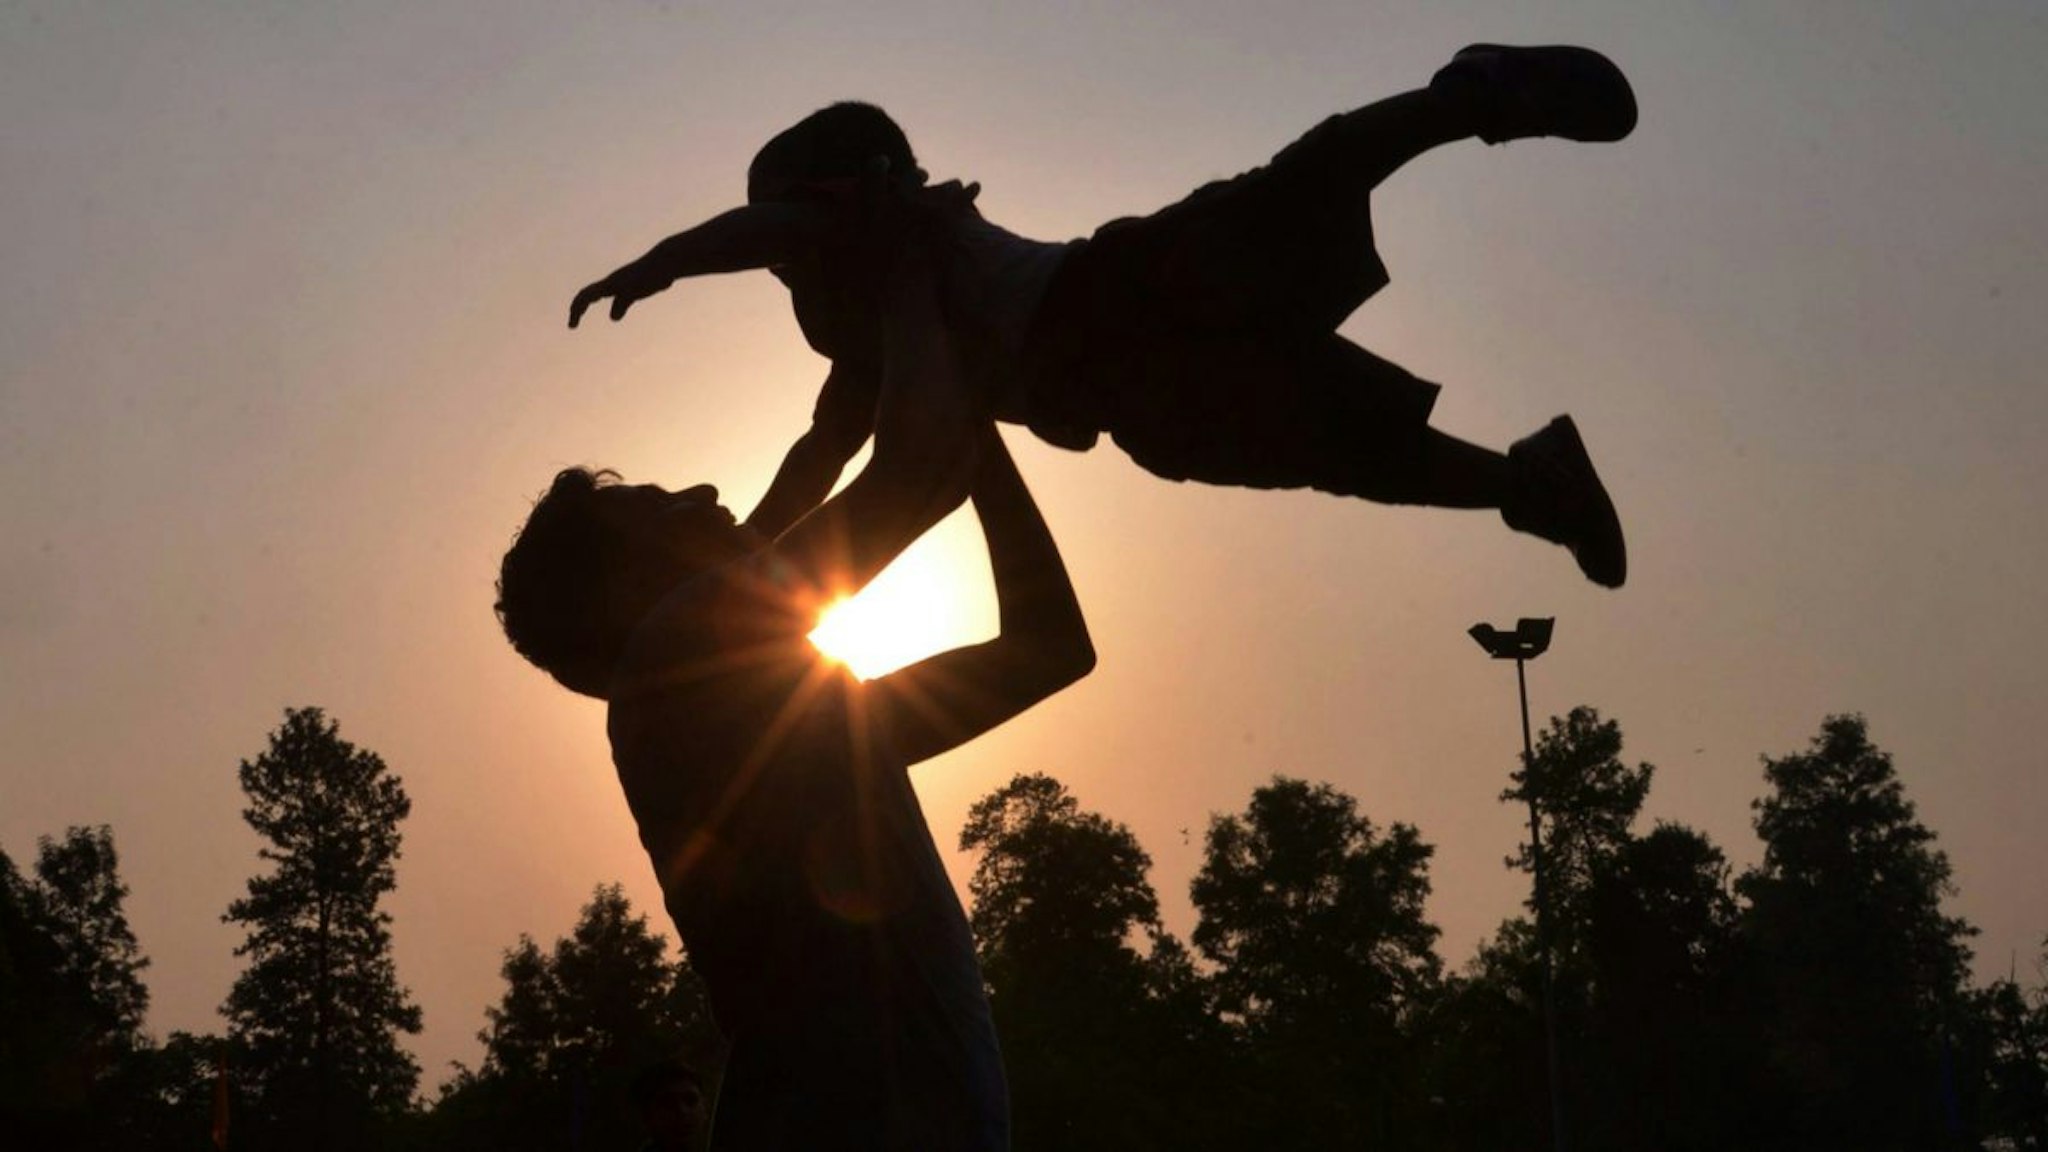 Indian father Shailesh throws up his son, Harish, at a park in Amritsar on June 19, 2016, on Father's Day, a day observed in many countries to celebrate fathers and fatherhood.